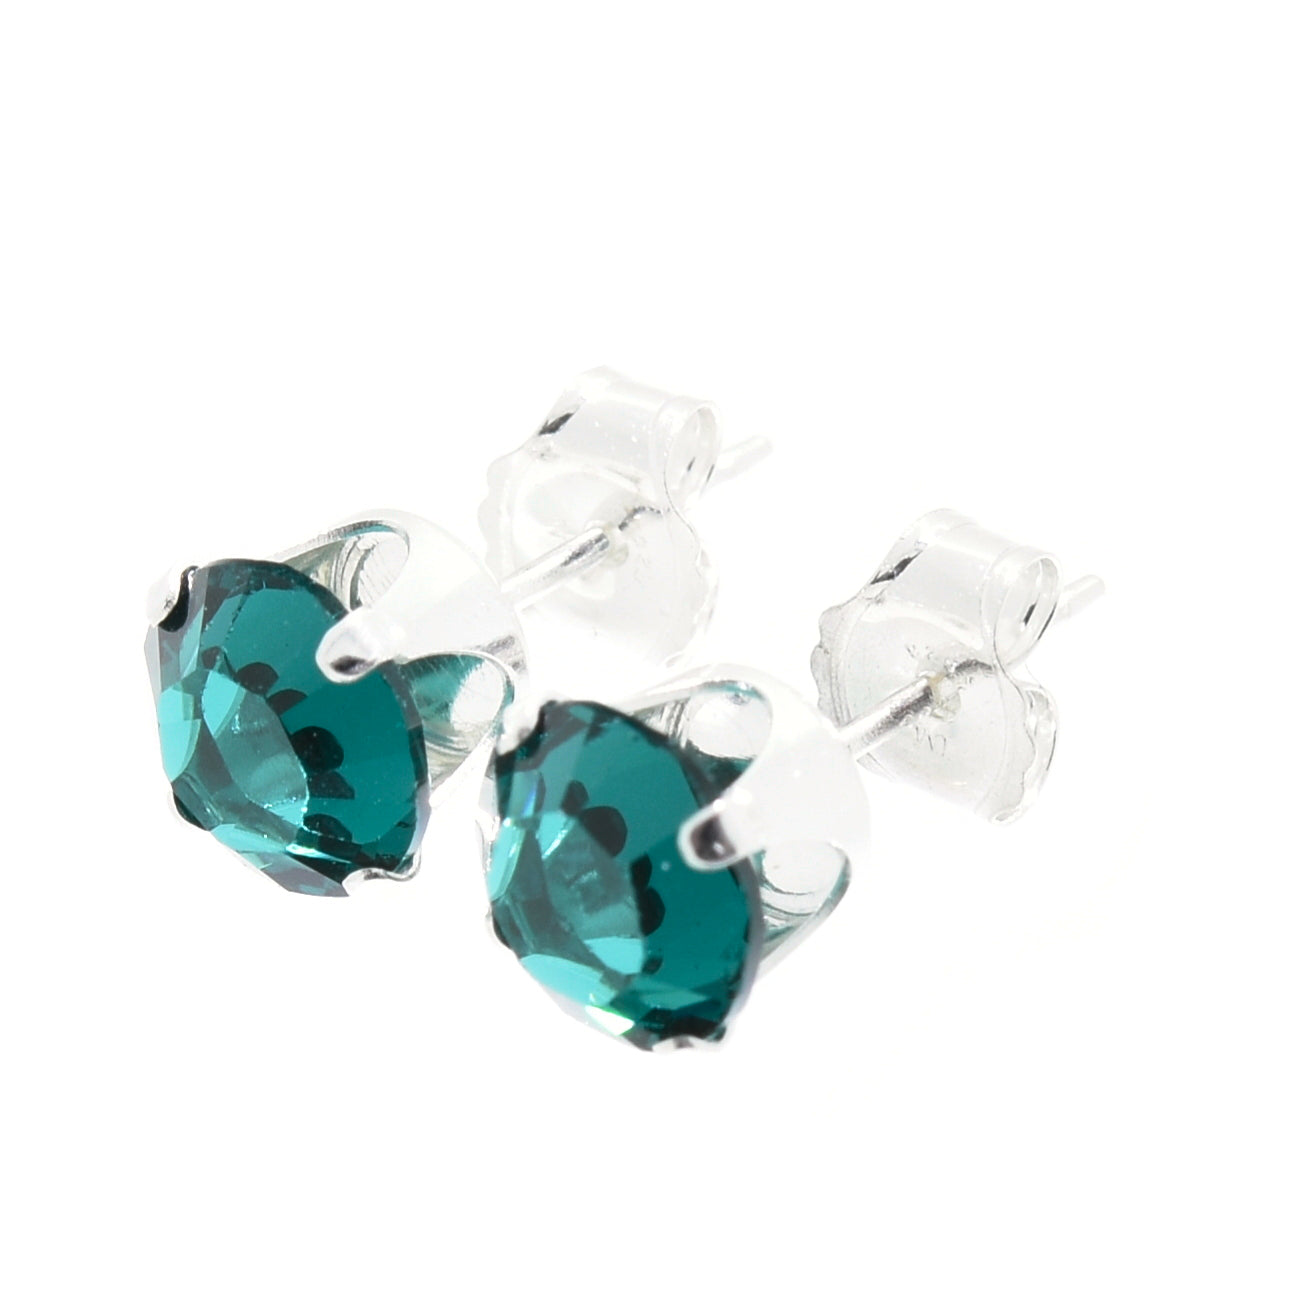 pewterhooter® Women's Classic Collection 925 Sterling silver earrings with sparkling Emerald Green channel crystals, packaged in a gift box for any occasion.